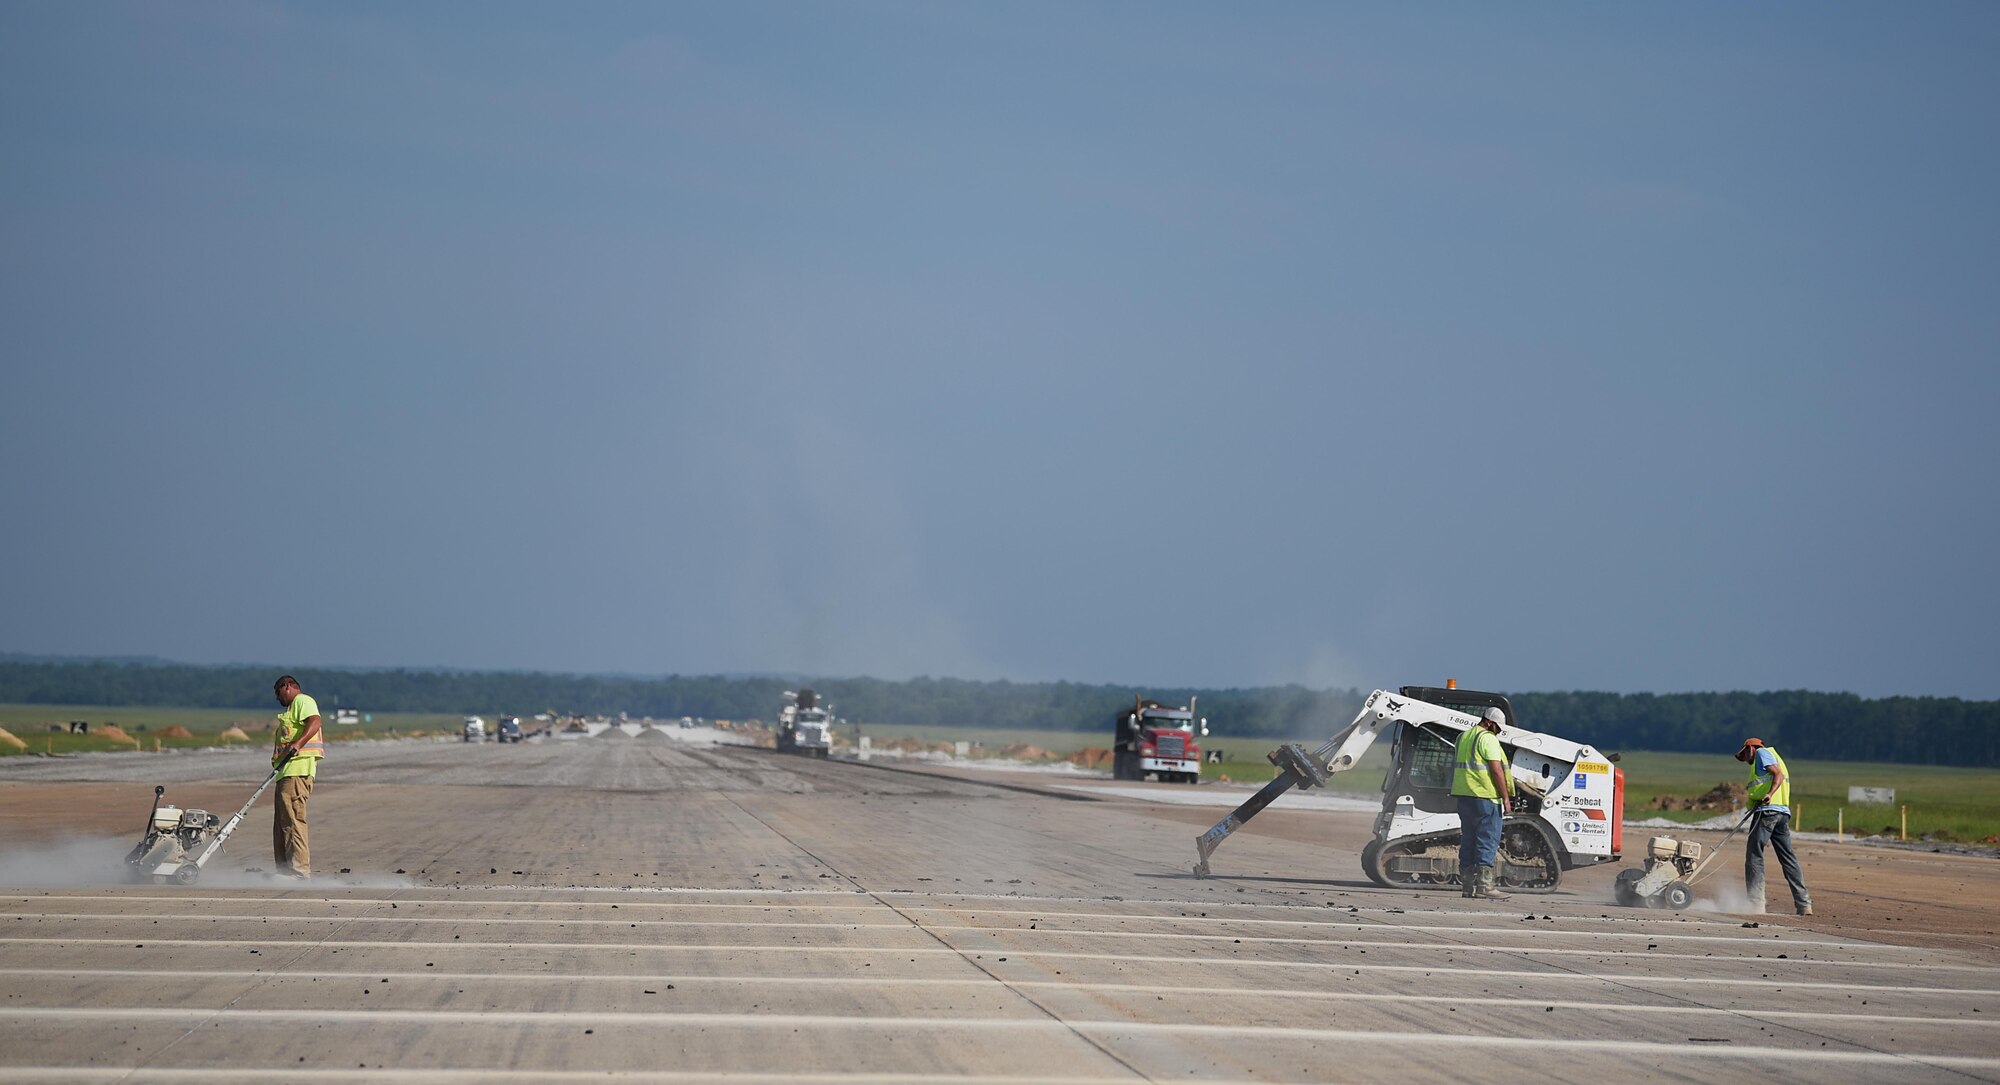 A construction crew contracted by the 14th Flying Training Wing separate slabs of concrete during reconstruction of the outside runway July 26, 2018, on Columbus Air Force Base, Mississippi. Hundreds of tons of stone has been used to resurface almost the entire outside runway. The project is one of many projects the 14th Civil Engineer Squadron is managing. (U.S. Air Force photo by Airman 1st Class Keith Holcomb)